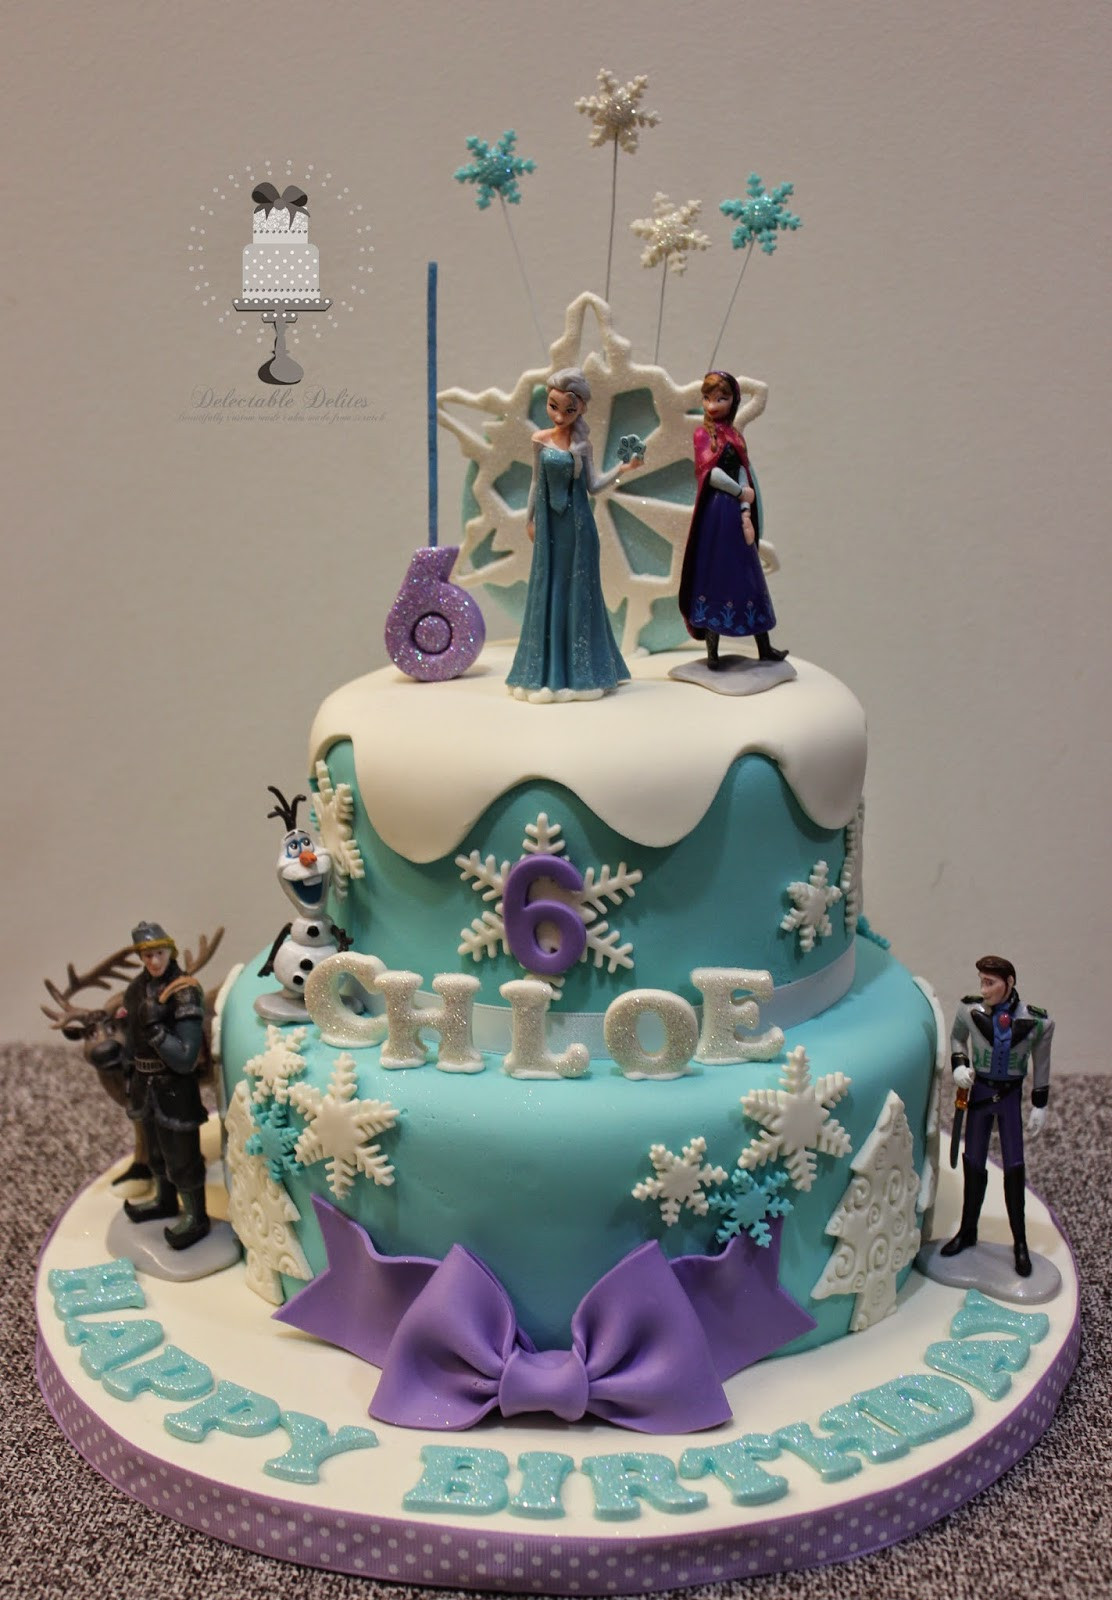 Frozen Birthday Cakes Images
 Delectable Delites Frozen cake for Chole s 6th birthday